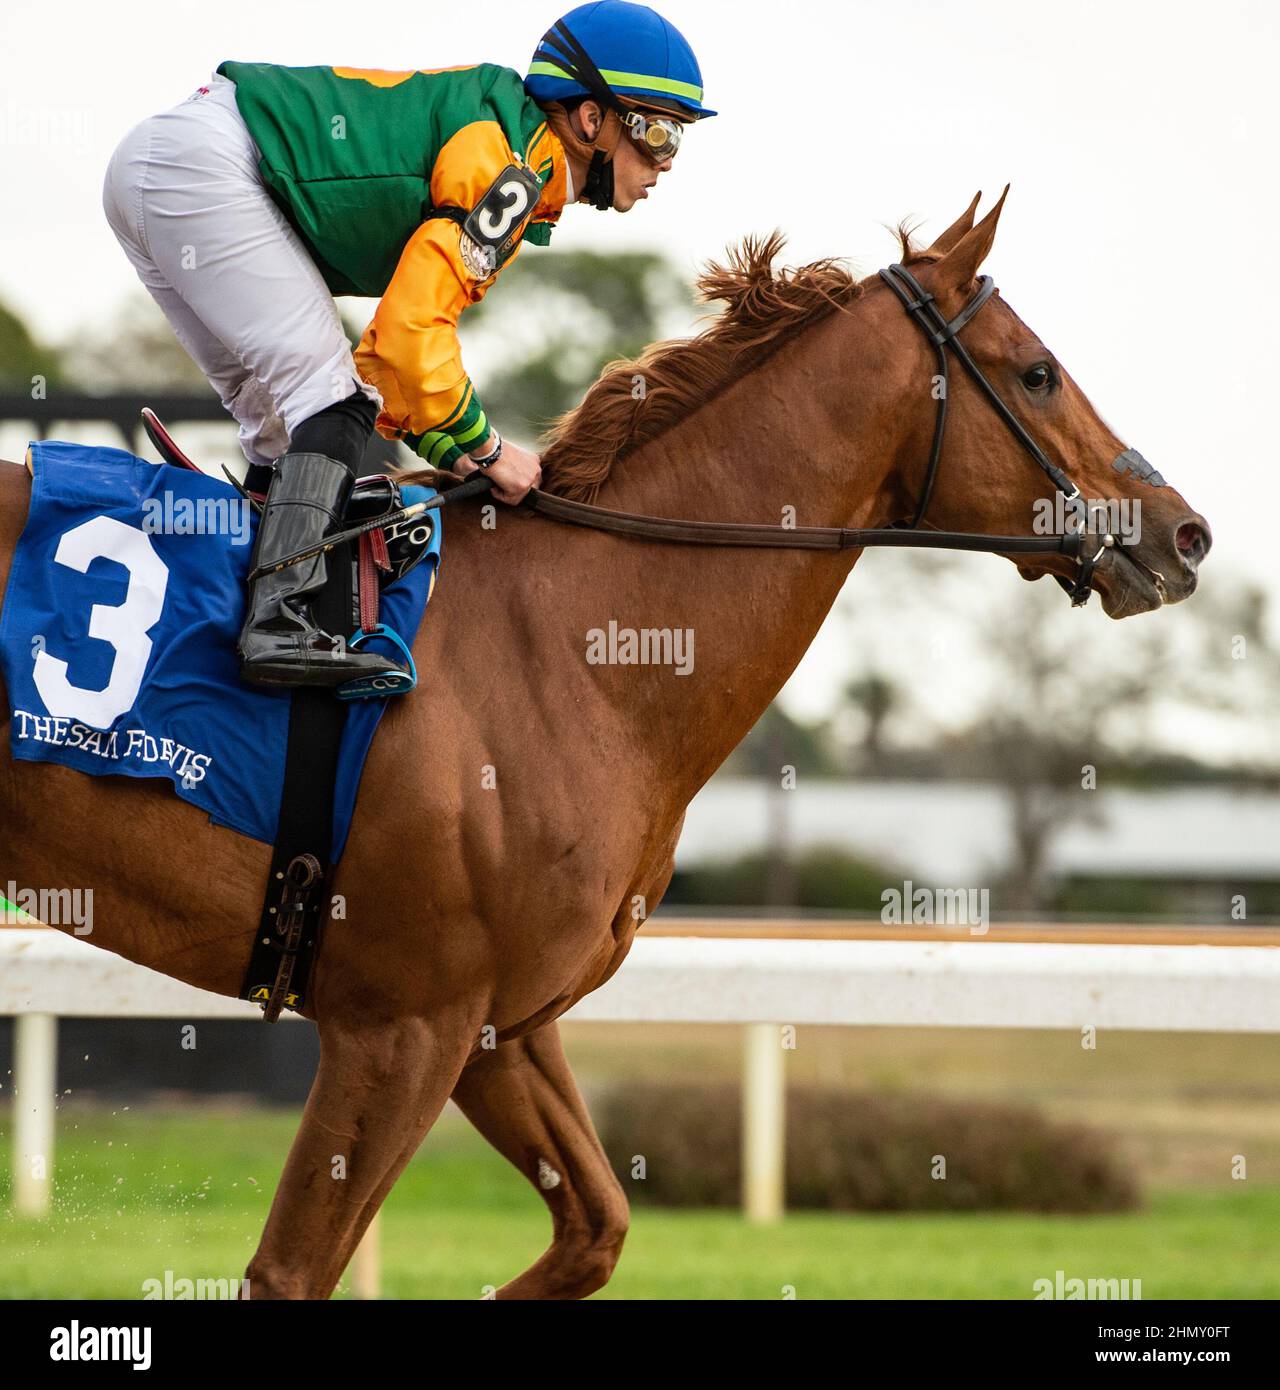 Oldsmar, Florida, USA. 12th Feb, 2022. February 12, 2022: #3 CLASSIC CAUSEWAY with Jockey Irad Ortiz, Jr. in the irons for Trainer Bryan Lynch decisively win the 42nd Running of the $250,000 Grade III Sam F. Davis Stakes at Tampa Bay Downs in Oldsmar, Florida on February 12, 2022. Dennis/Eclipse Sportswire/CSM/Alamy Live News Stock Photo